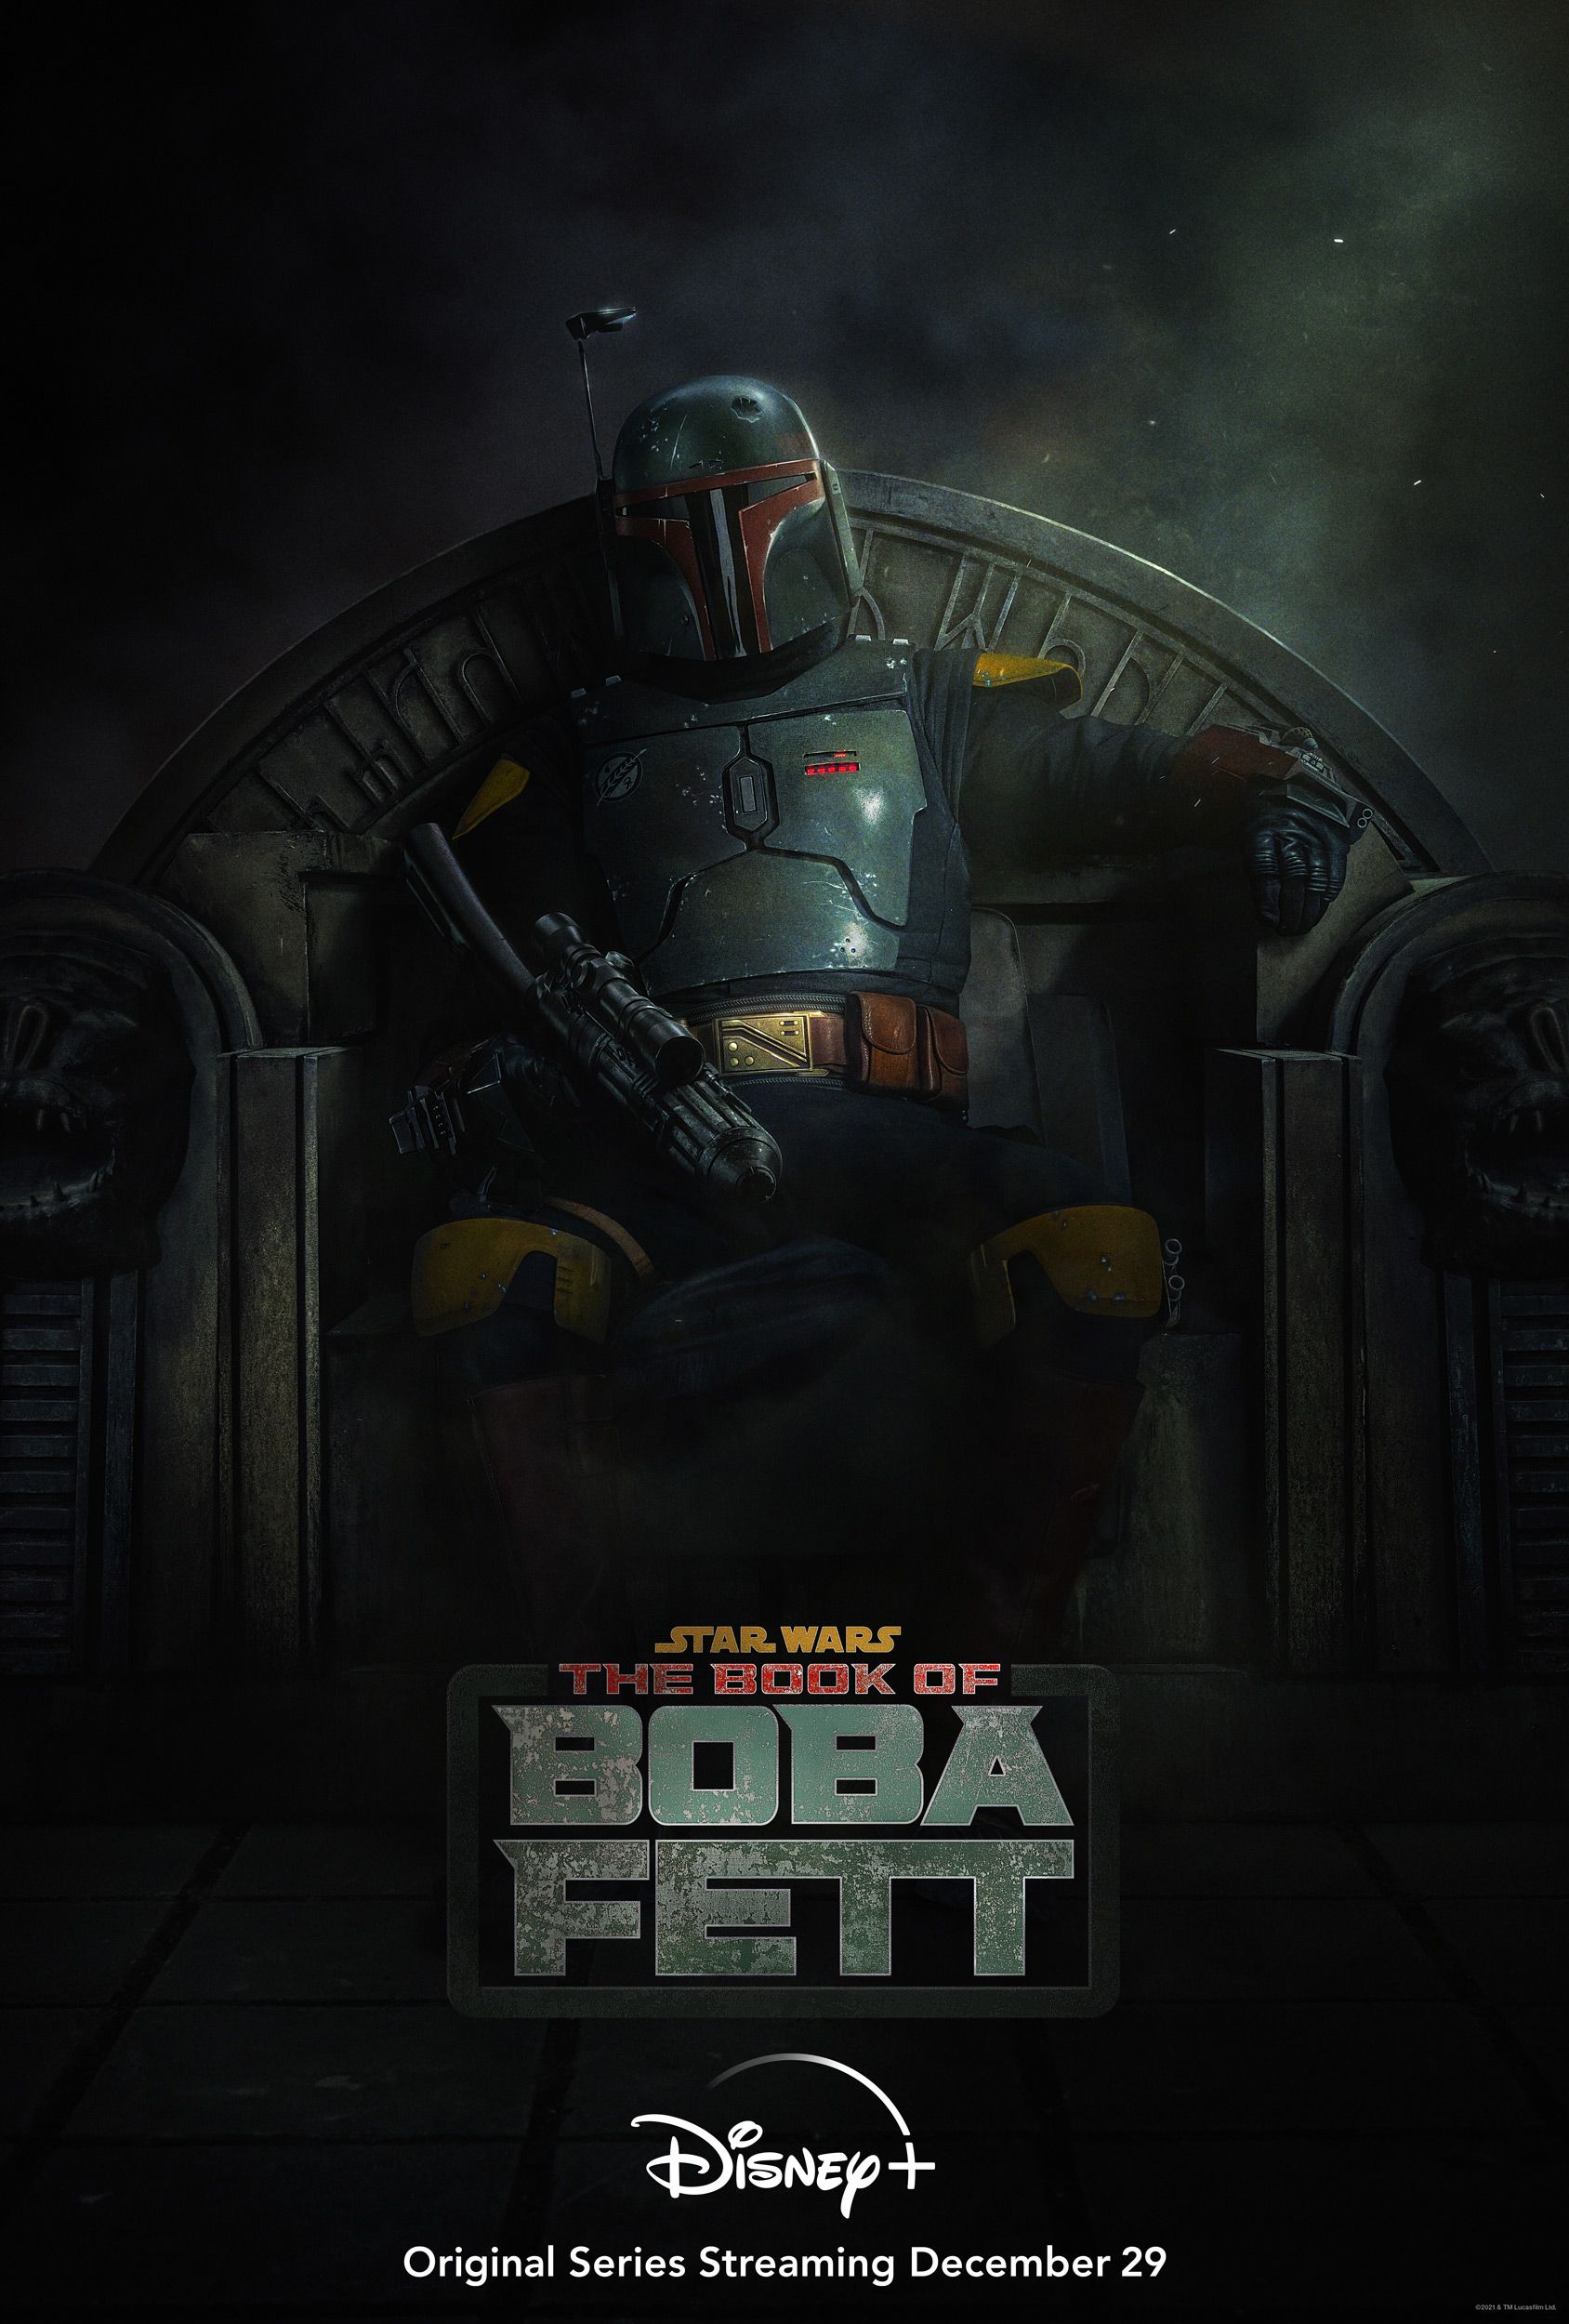 Mandalorian spin-off The Book of Boba Fett release date confirmed